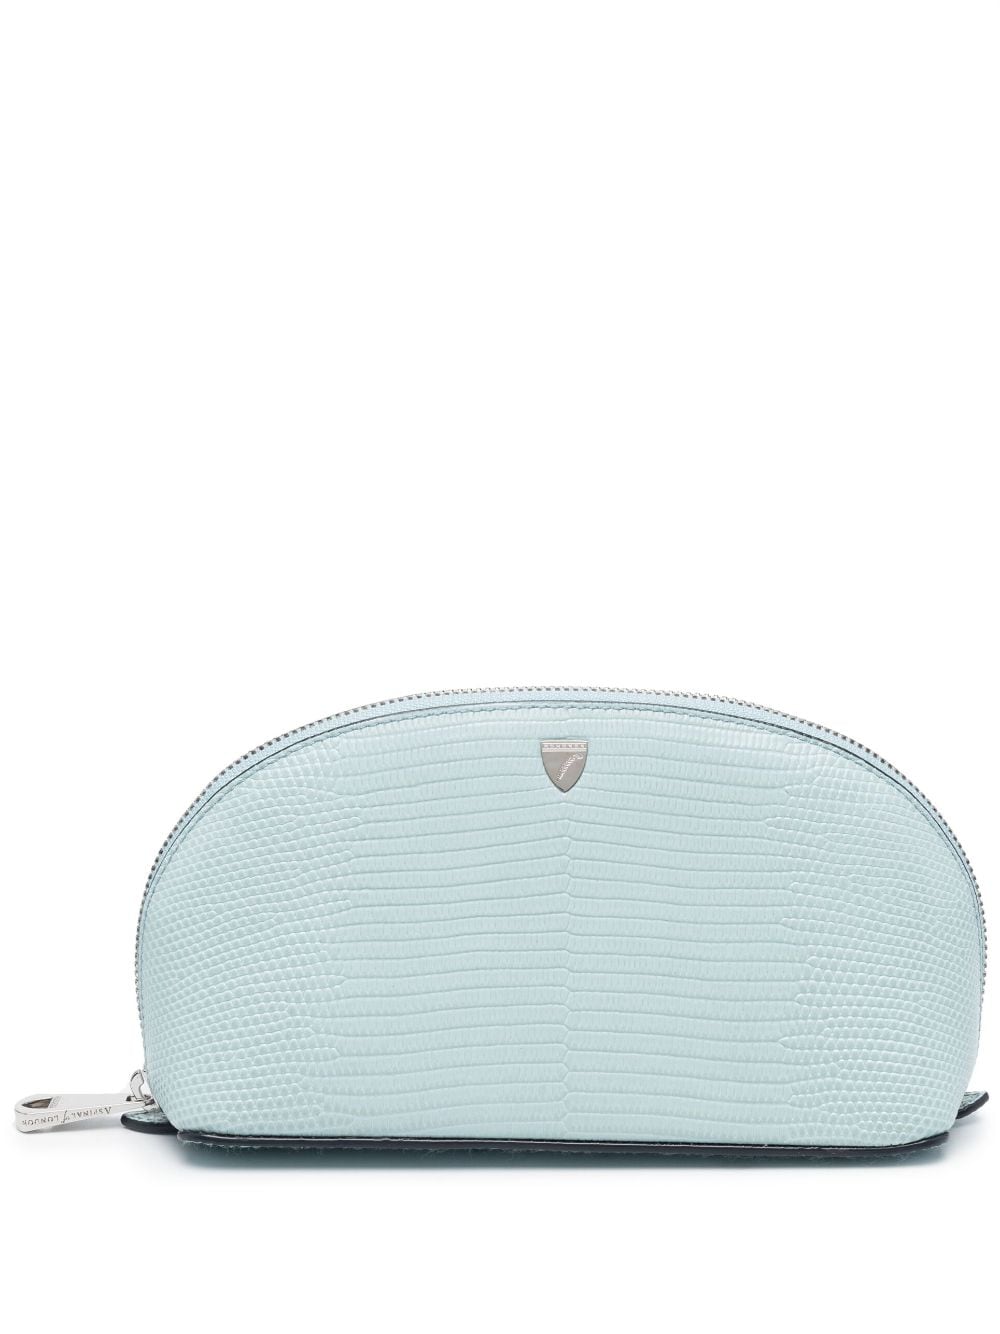 Aspinal Of London small leather make-up bag - Blue von Aspinal Of London